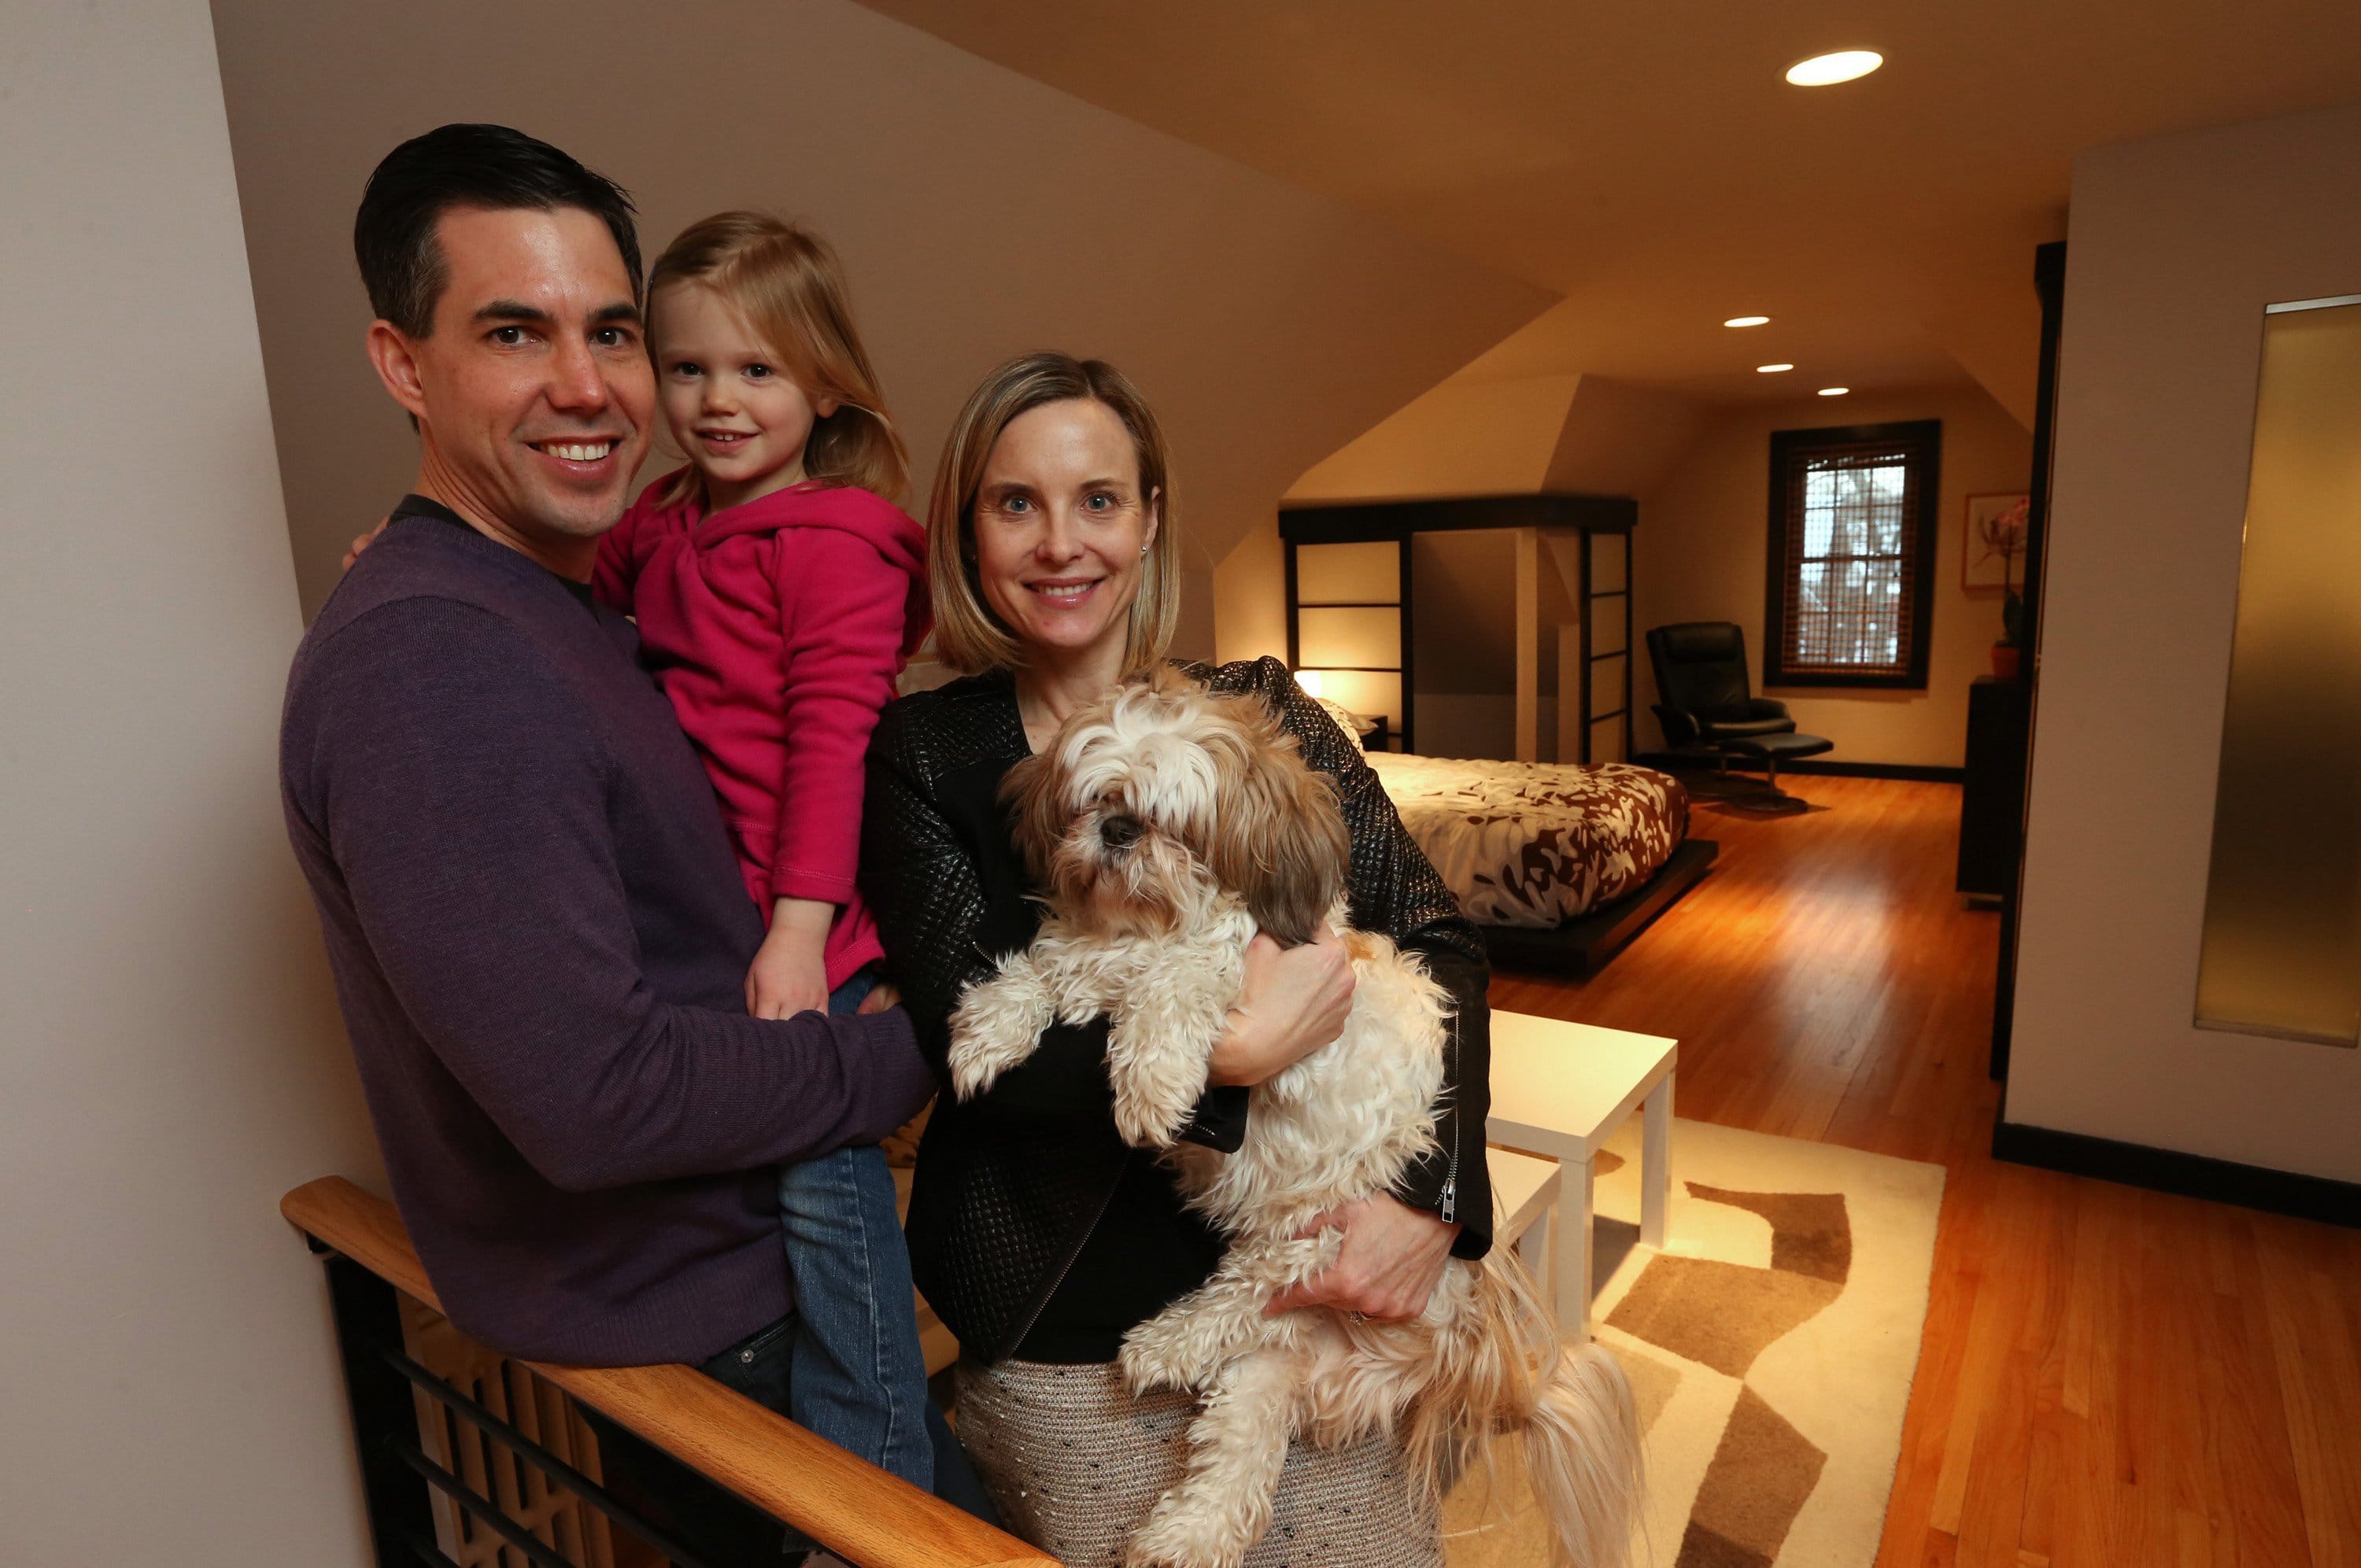 Dan and Nancy Griffin and their daughter in their converted attic suite in their Minneapolis home.